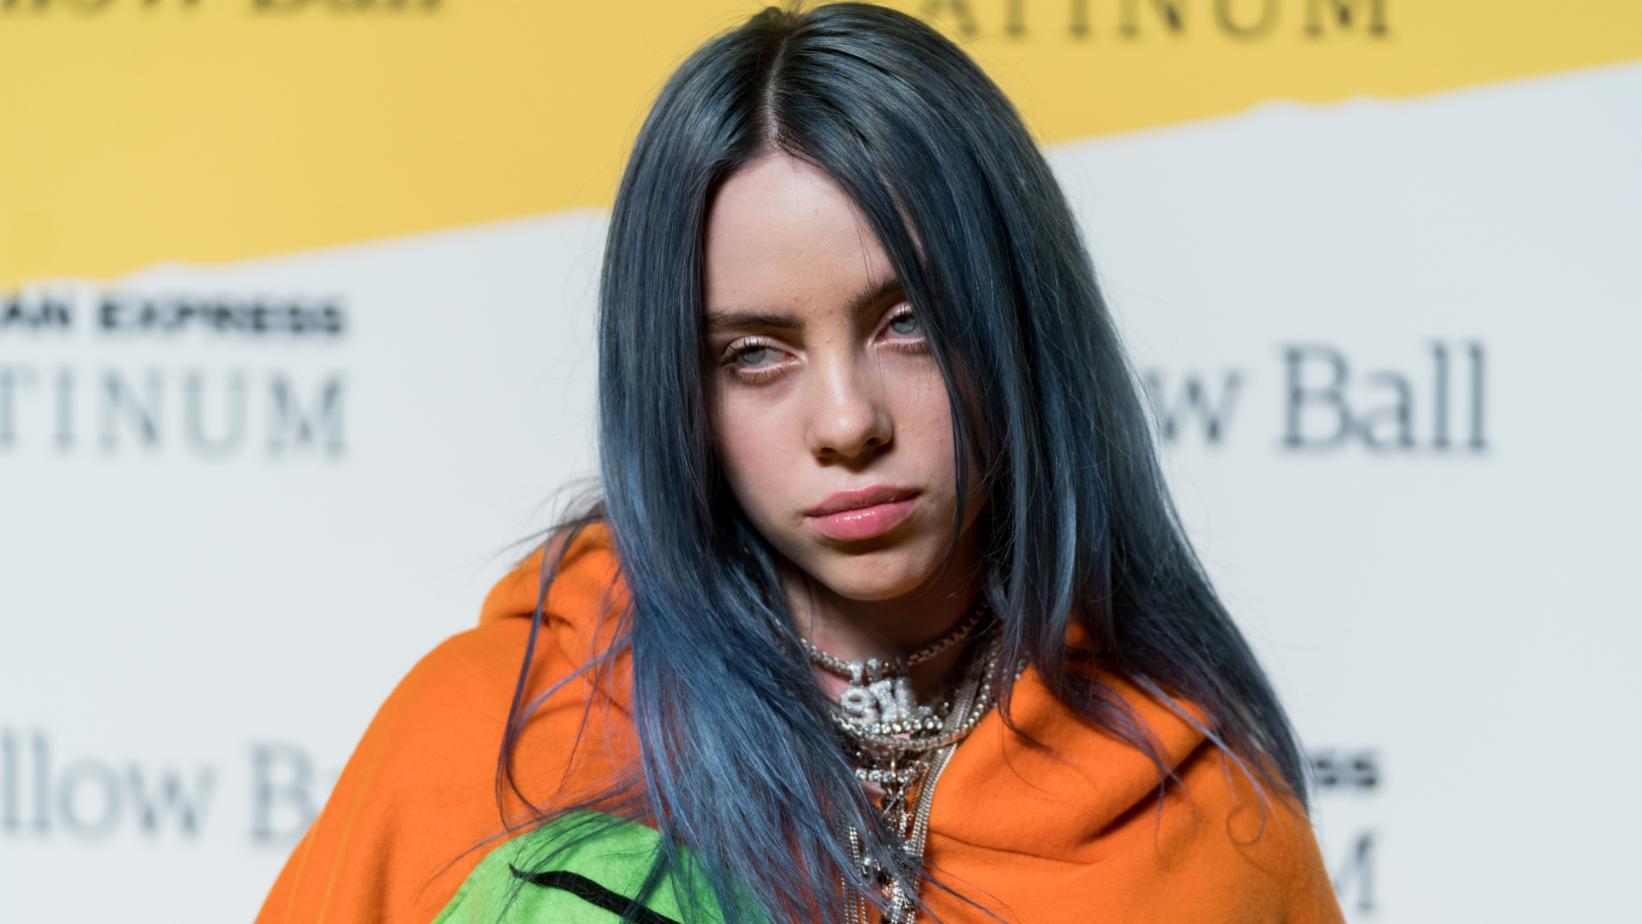 Billie Eilish's Next Clue: When The Party's Over